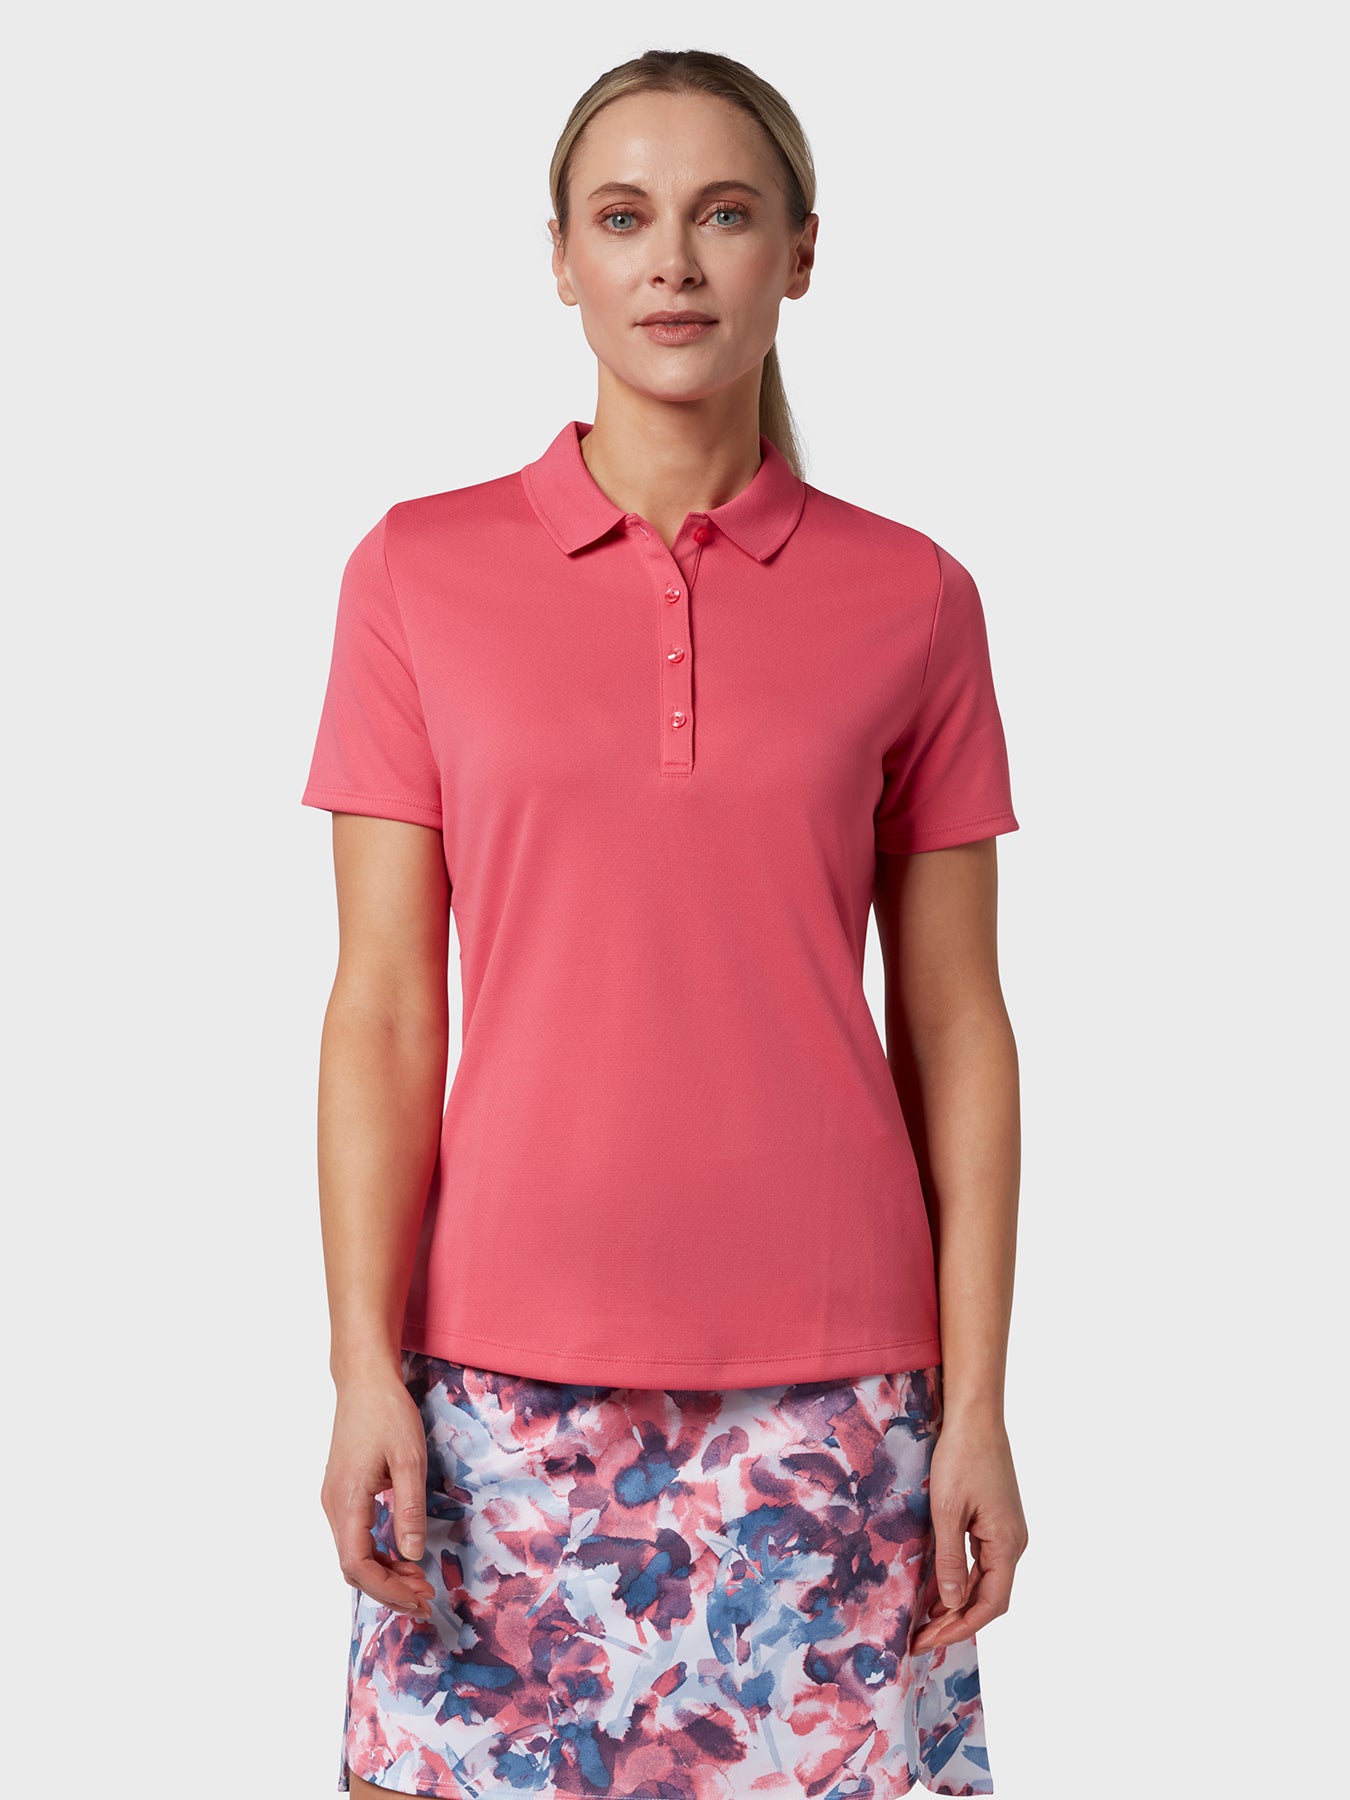 View Swing Tech Womens Polo In Fruit Dove Fruit Dove S information